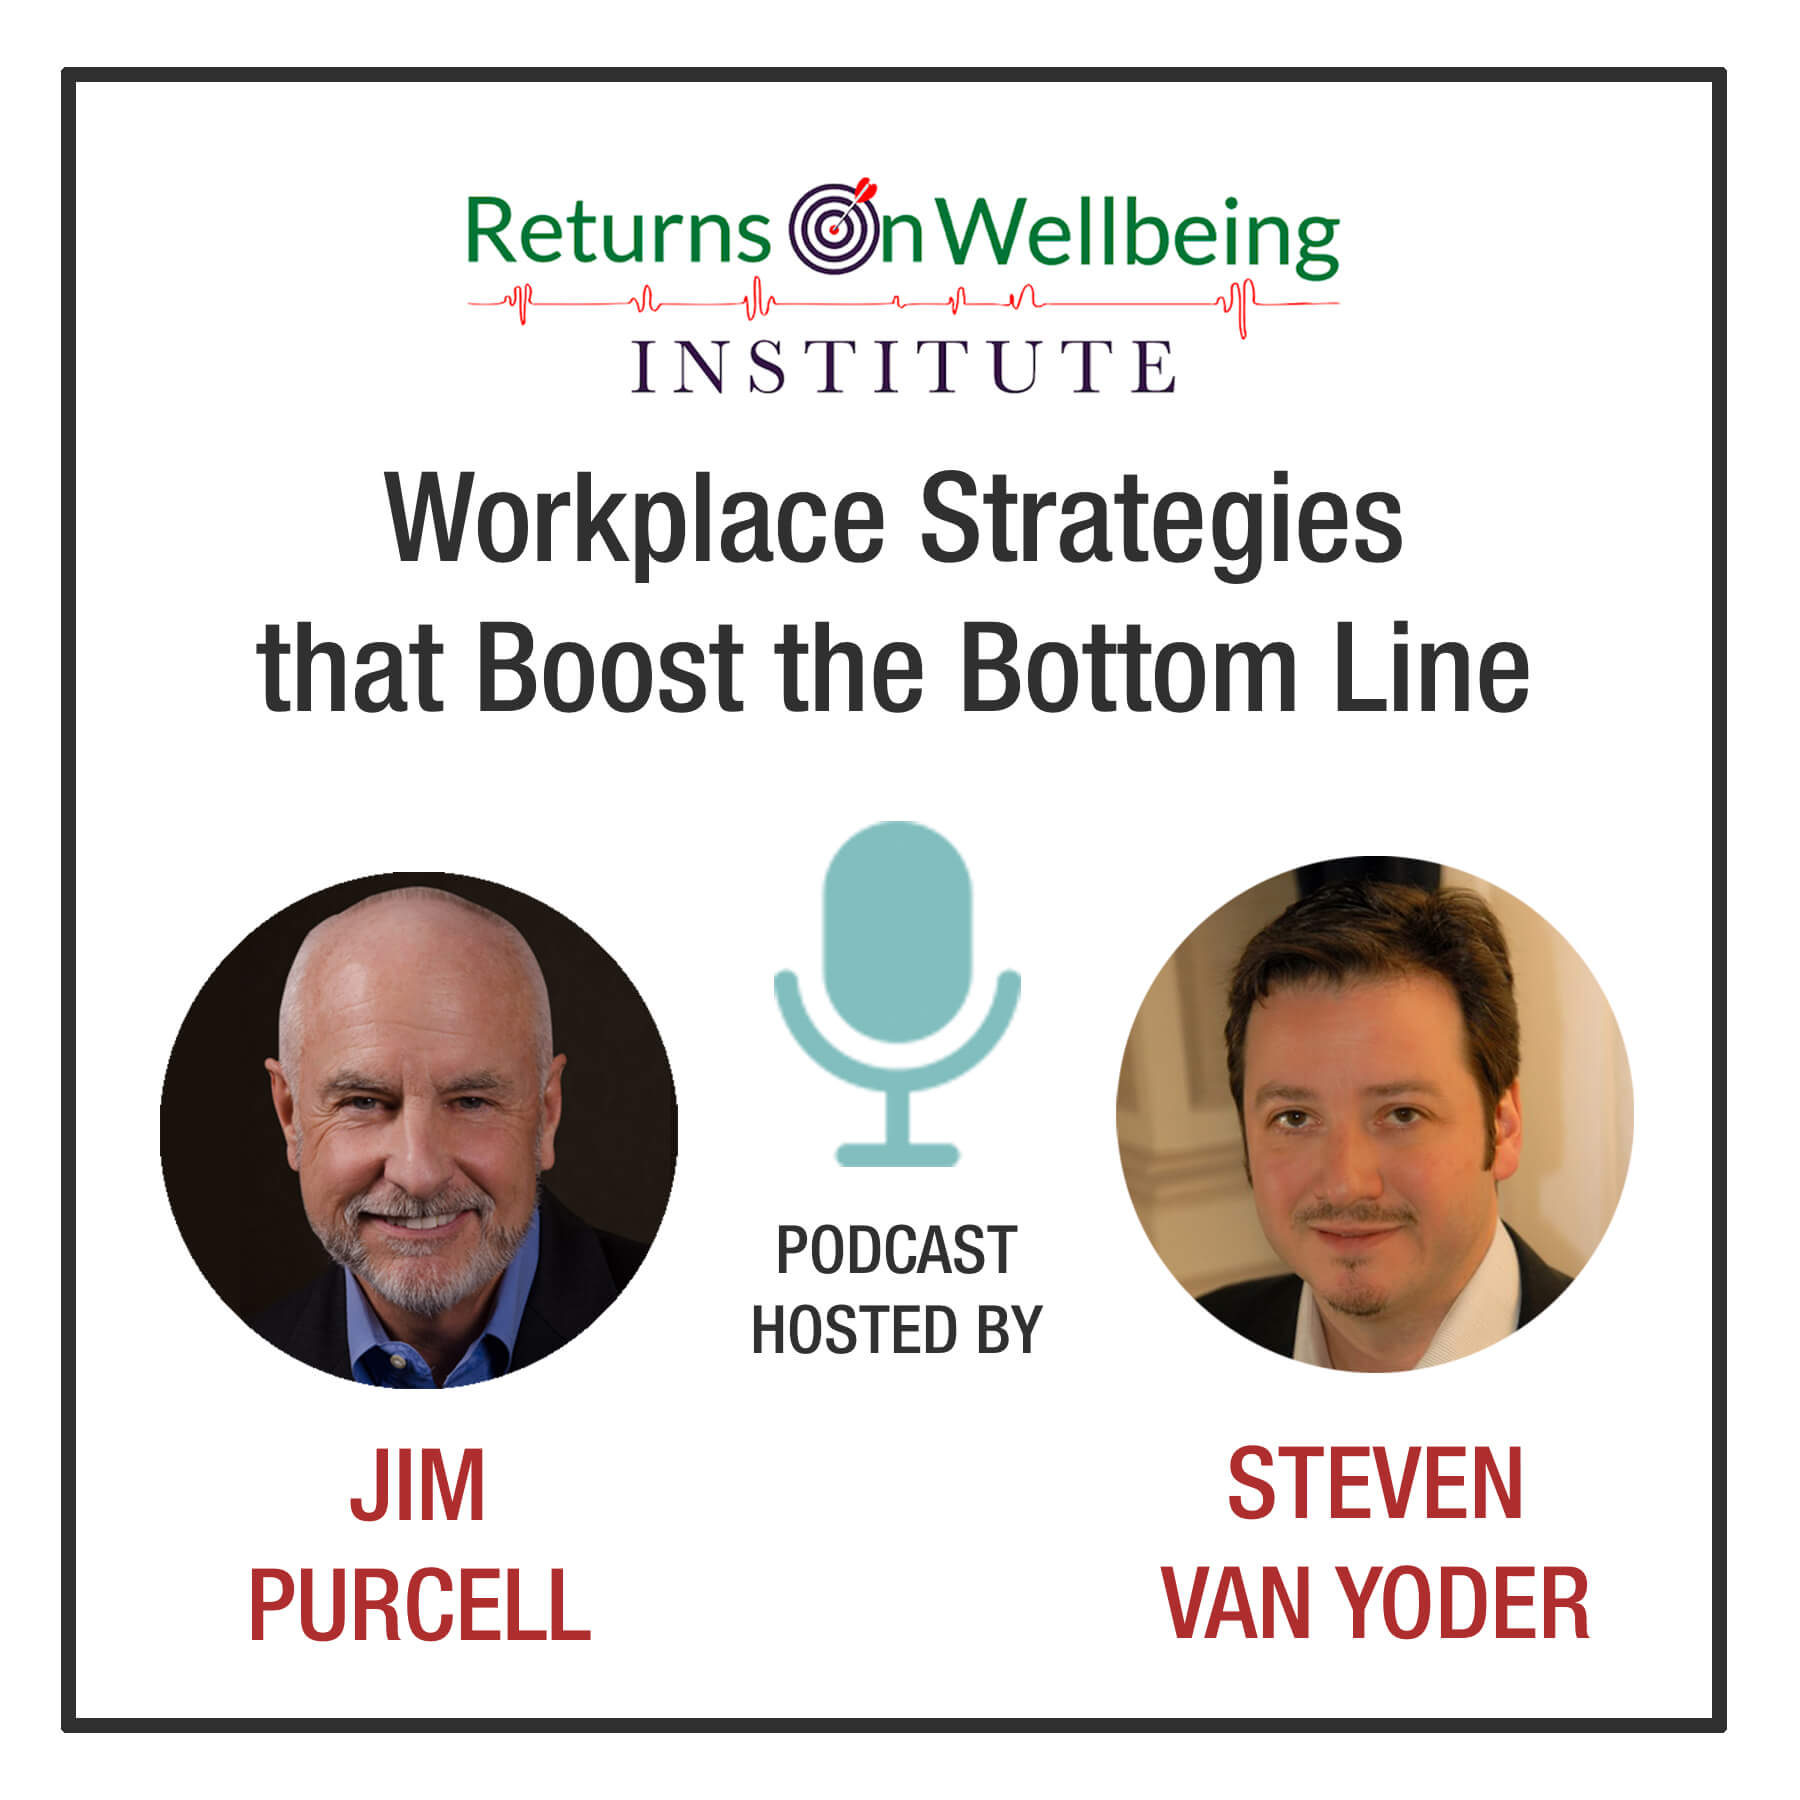 RETURNS ON WELLBEING INSTITUTE PODCAST